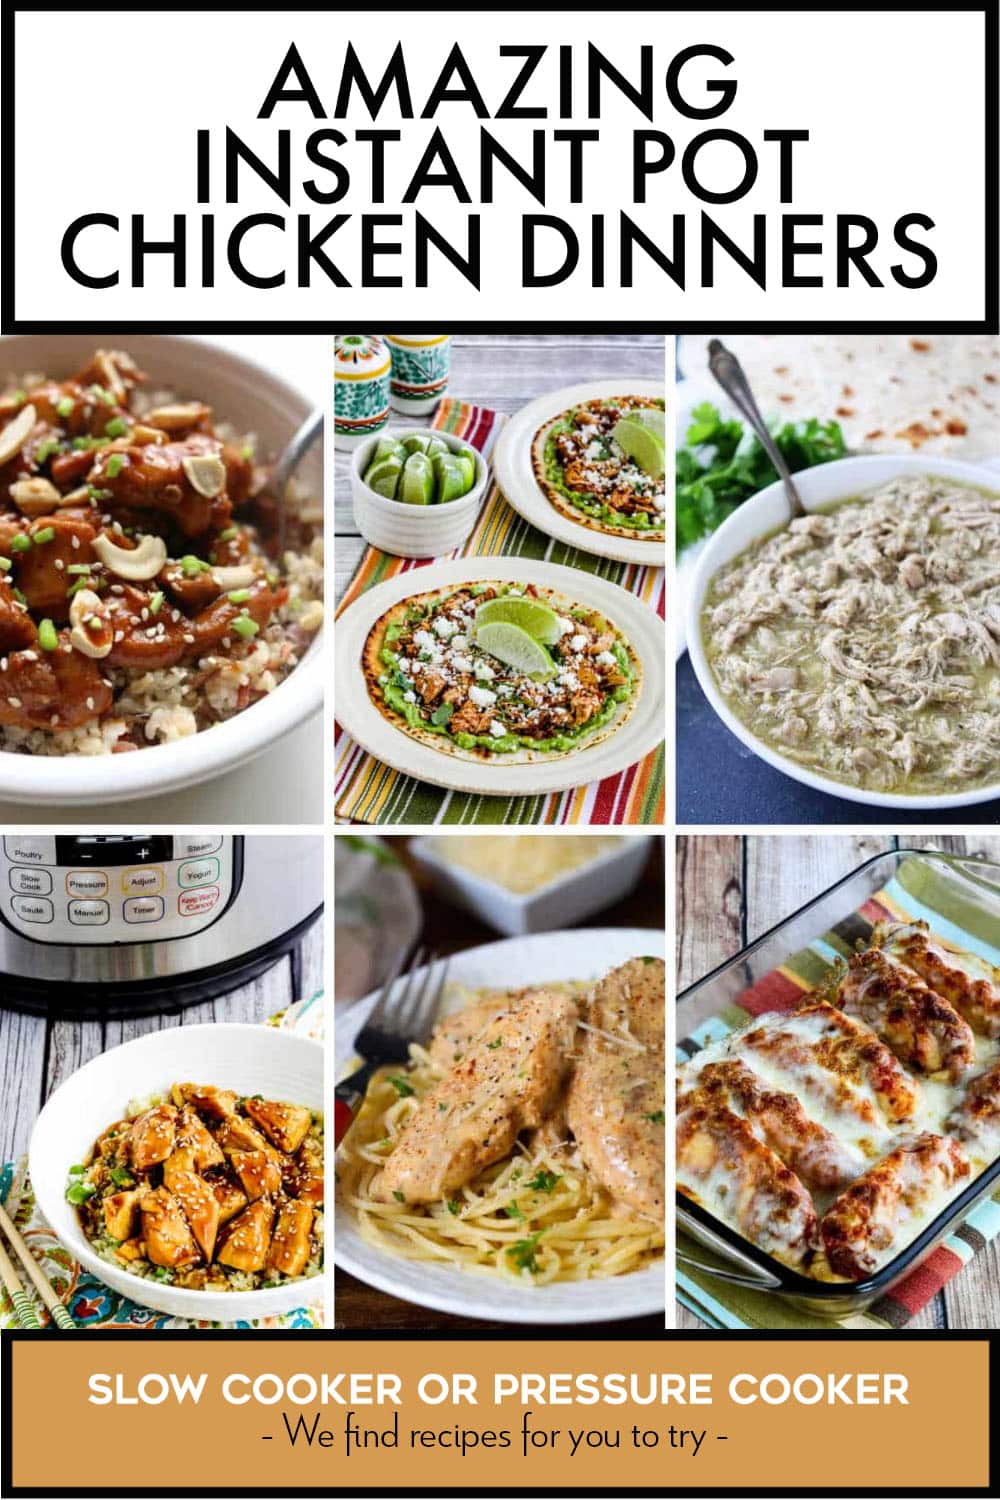 Pinterest image of Amazing Instant Pot Chicken Dinners